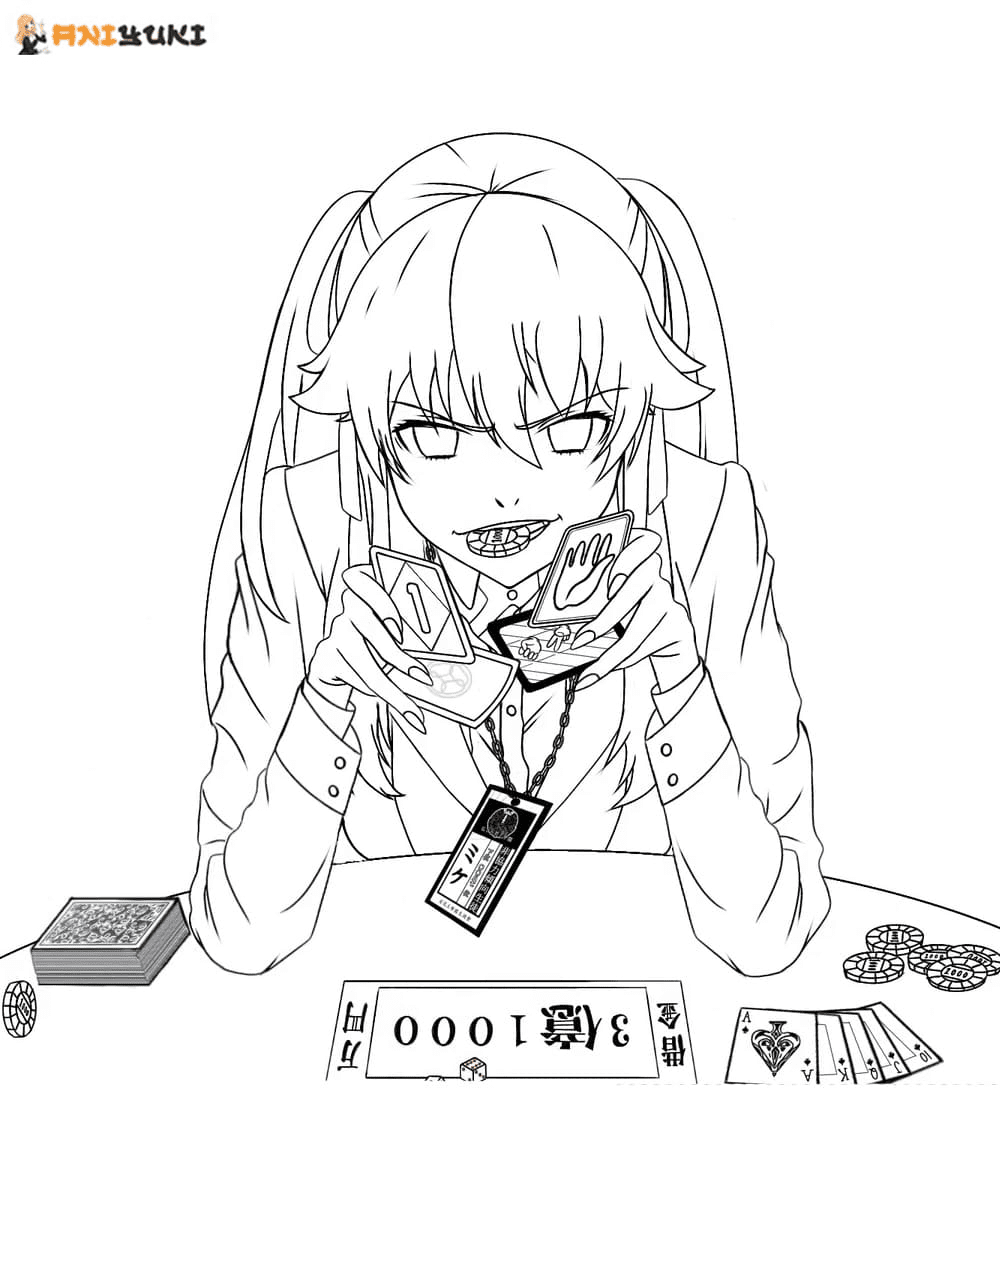 Mary from Kakegurui Coloring Page